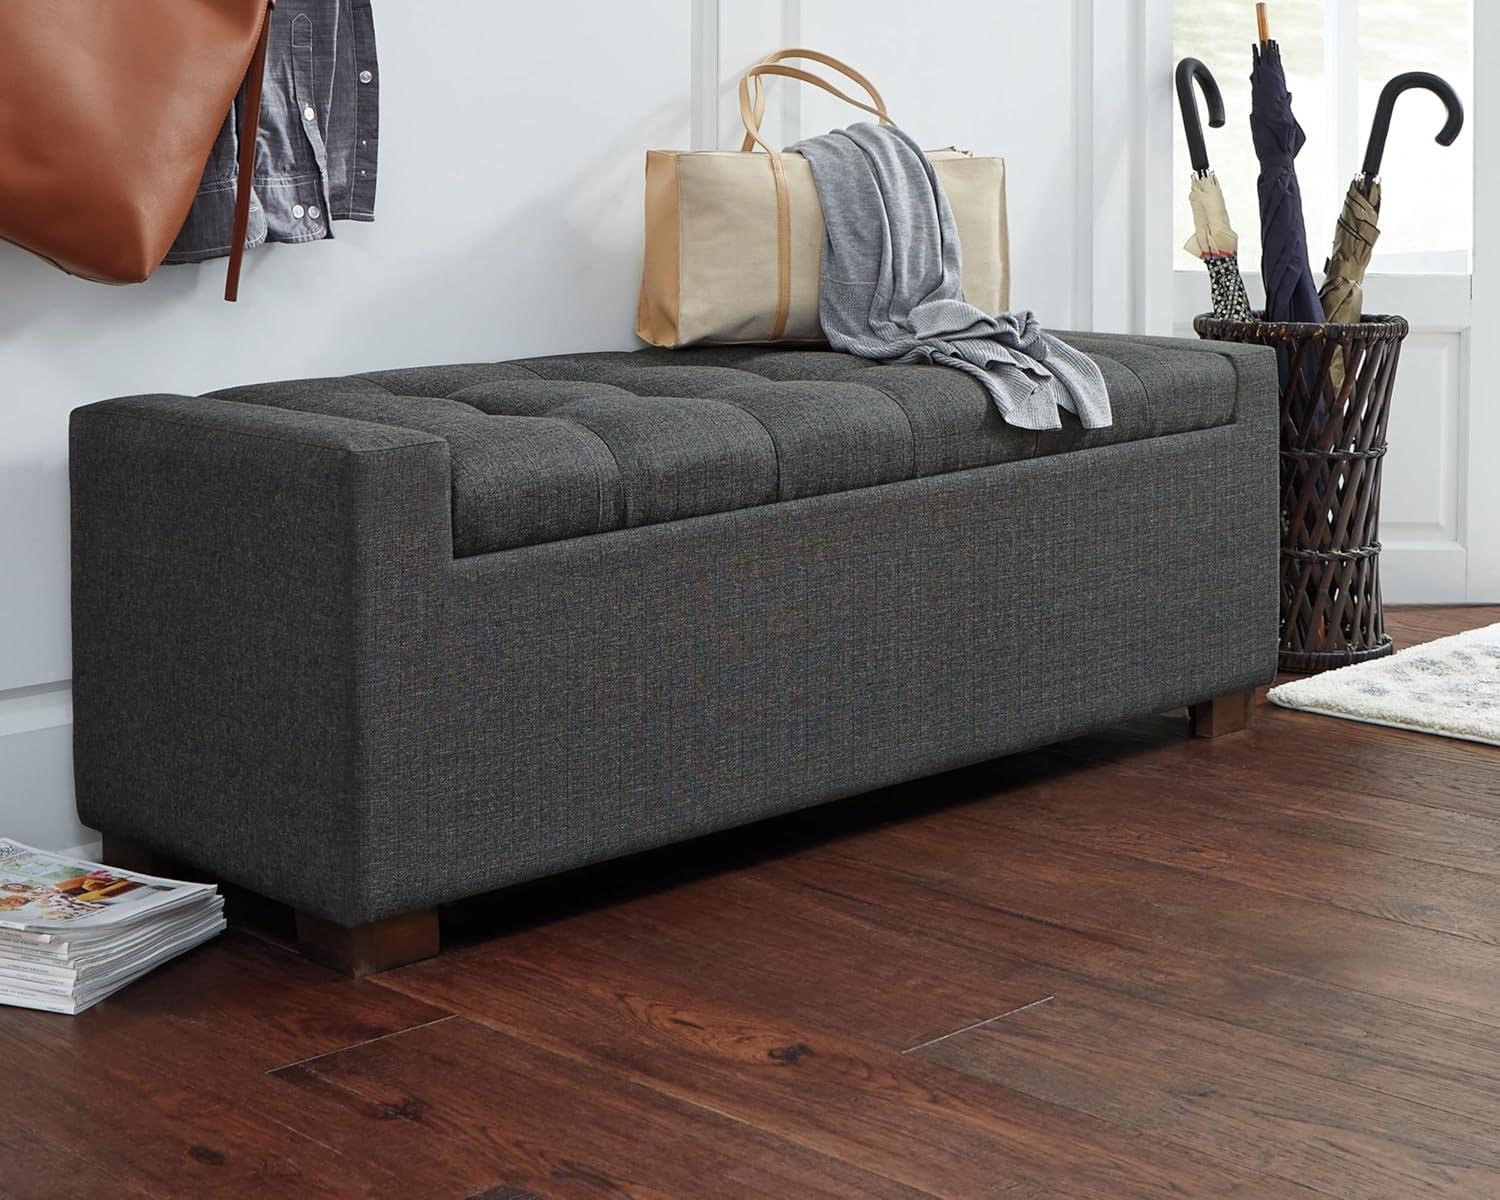 Transitional Charcoal Gray Tufted Storage Bench with Brown Wood Legs